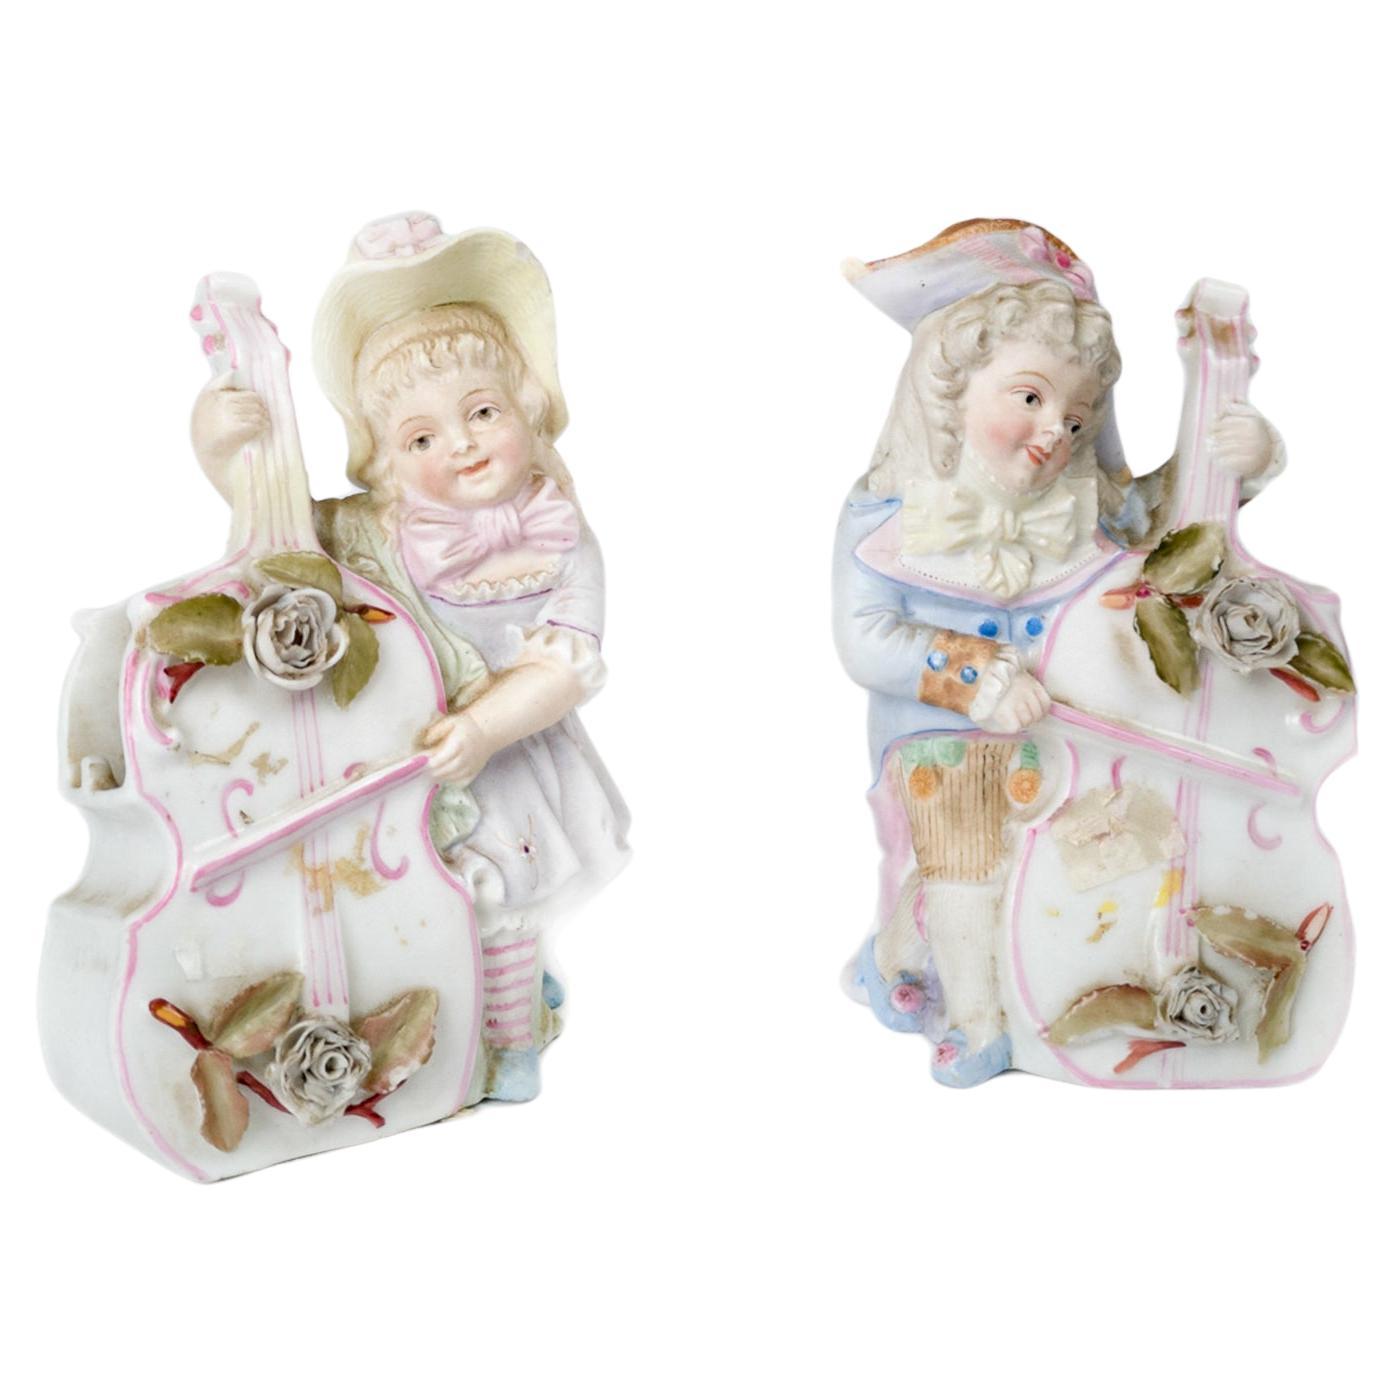 Musicians Porcelain Figures Vases by Heubach Brothers, Early 20th Century